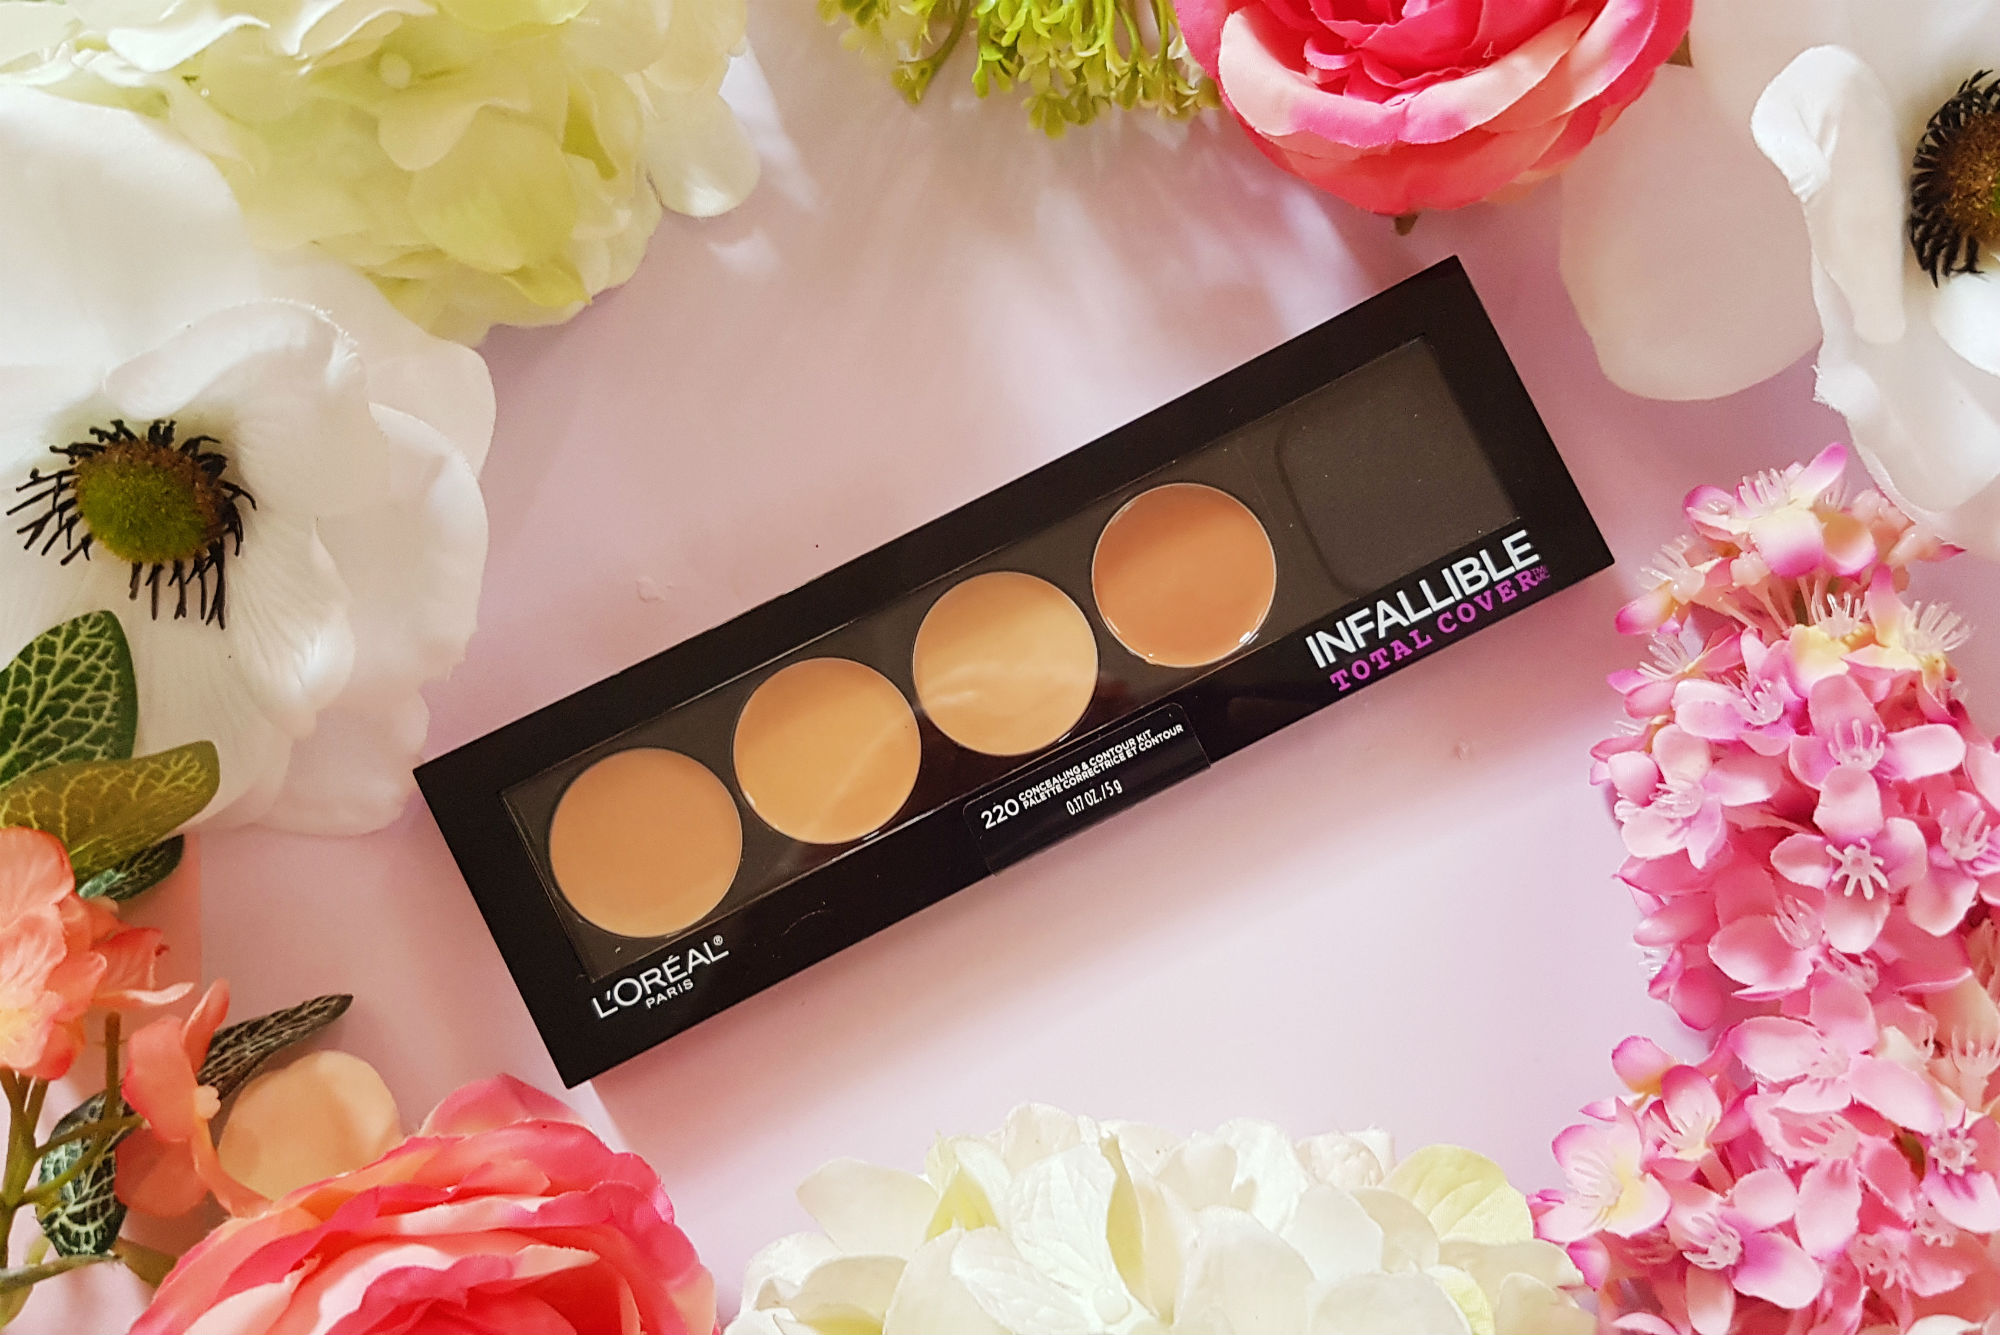 l'oreal infallible total cover concealing & contour kit review